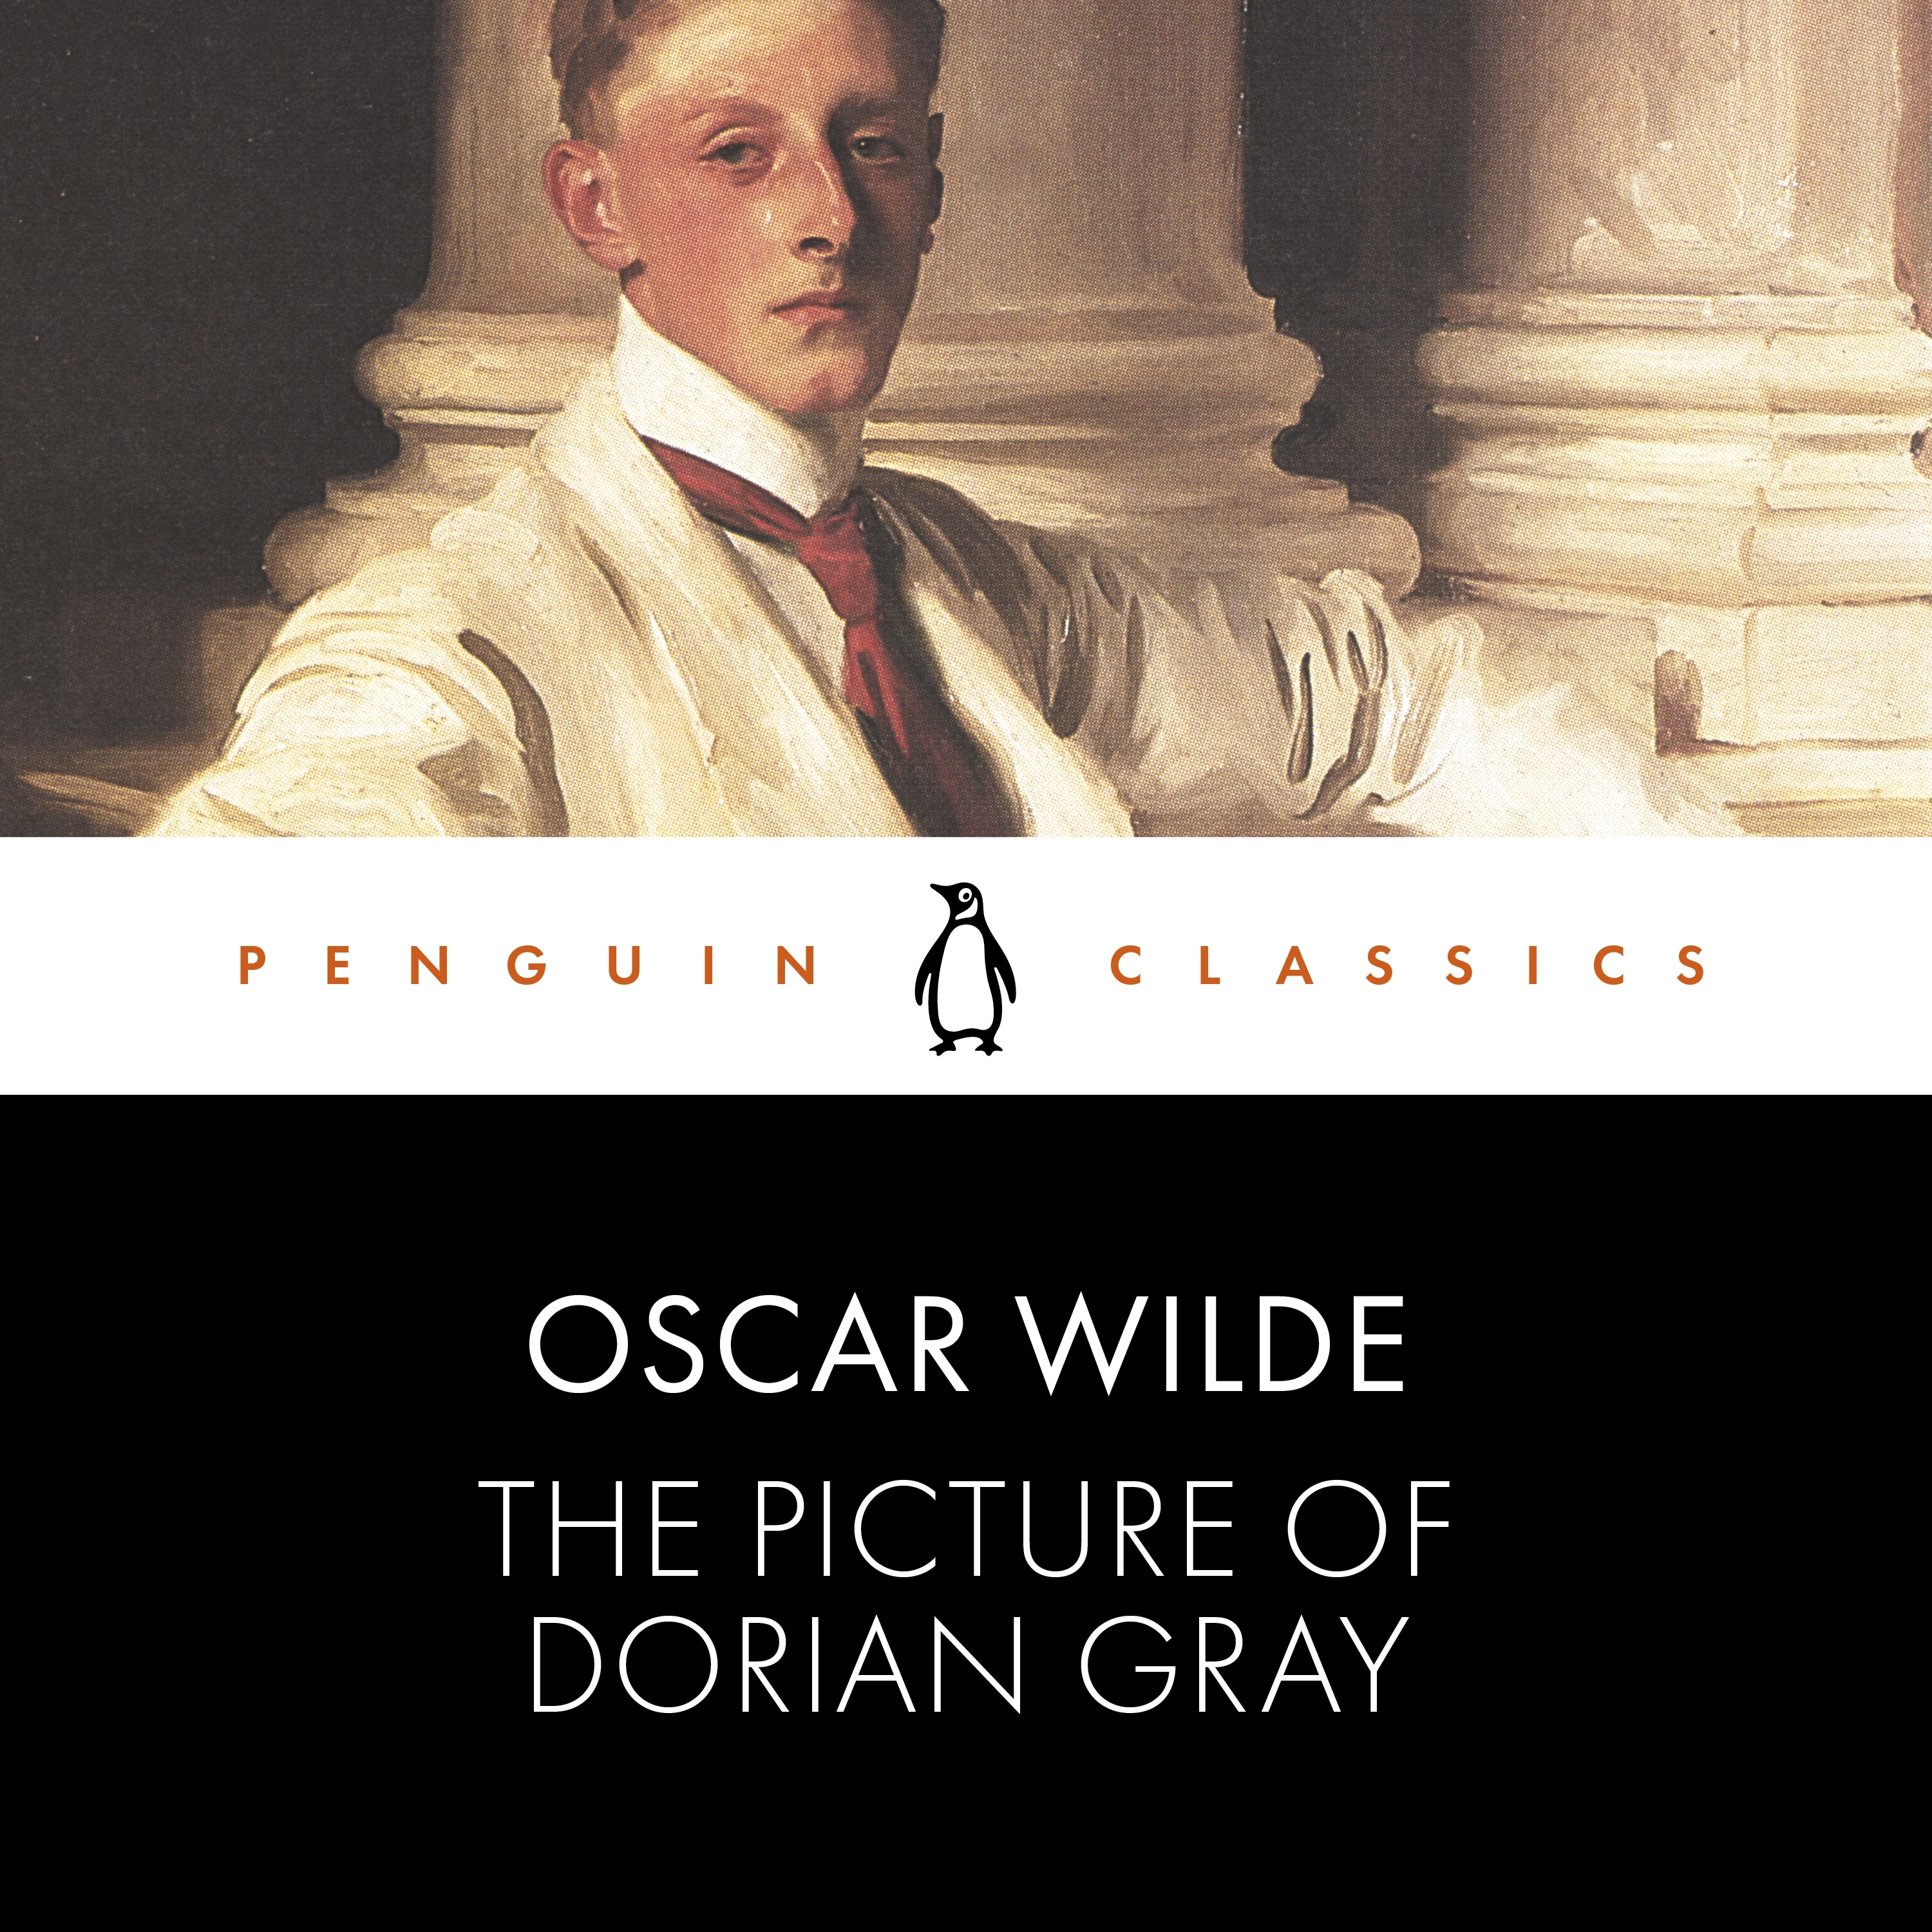 the picture of dorian gray extended essay